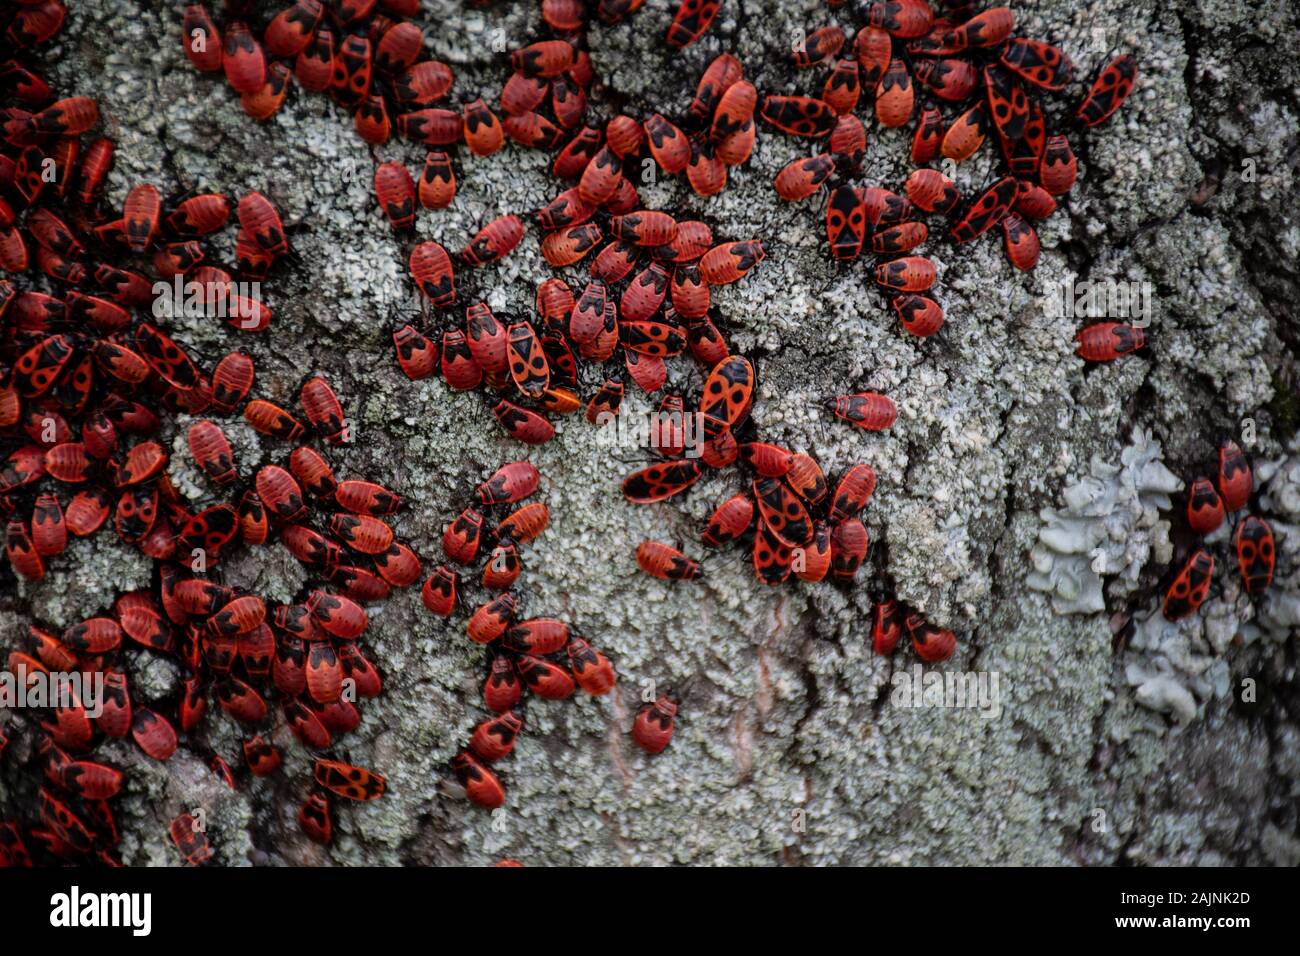 Many firebugs on a tree in different stages of development. Close-up photo insect beetles firebug. Beetles with a red spotted back. Beetle bugs Stock Photo